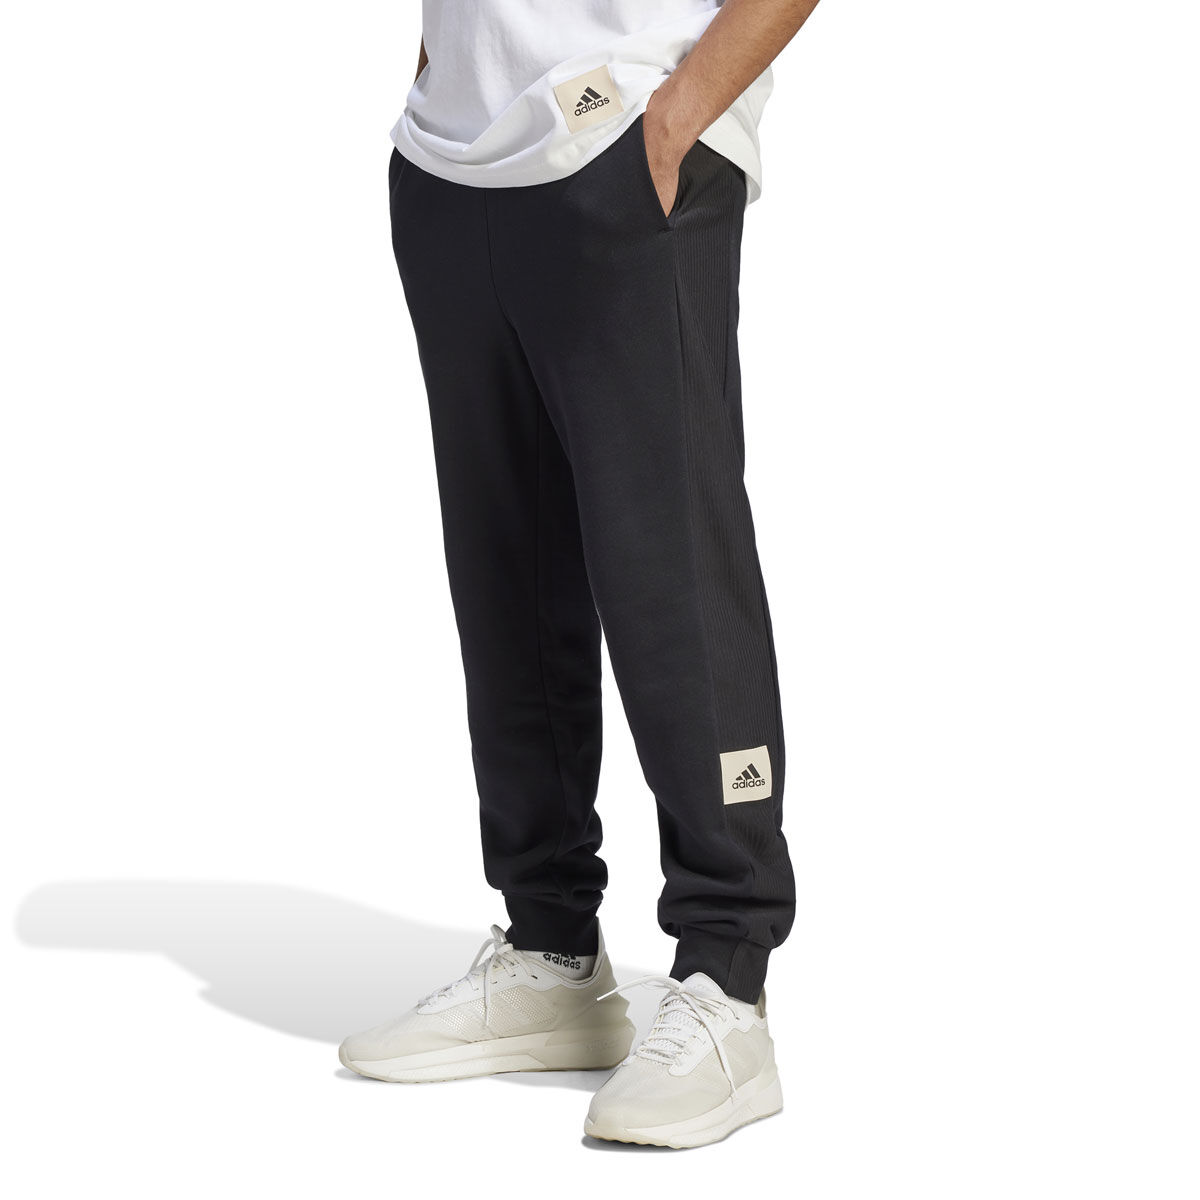 MEN'S 3-STRIPE TRICOT TAPERED TRACK PANT - H46106 – The Sports Center